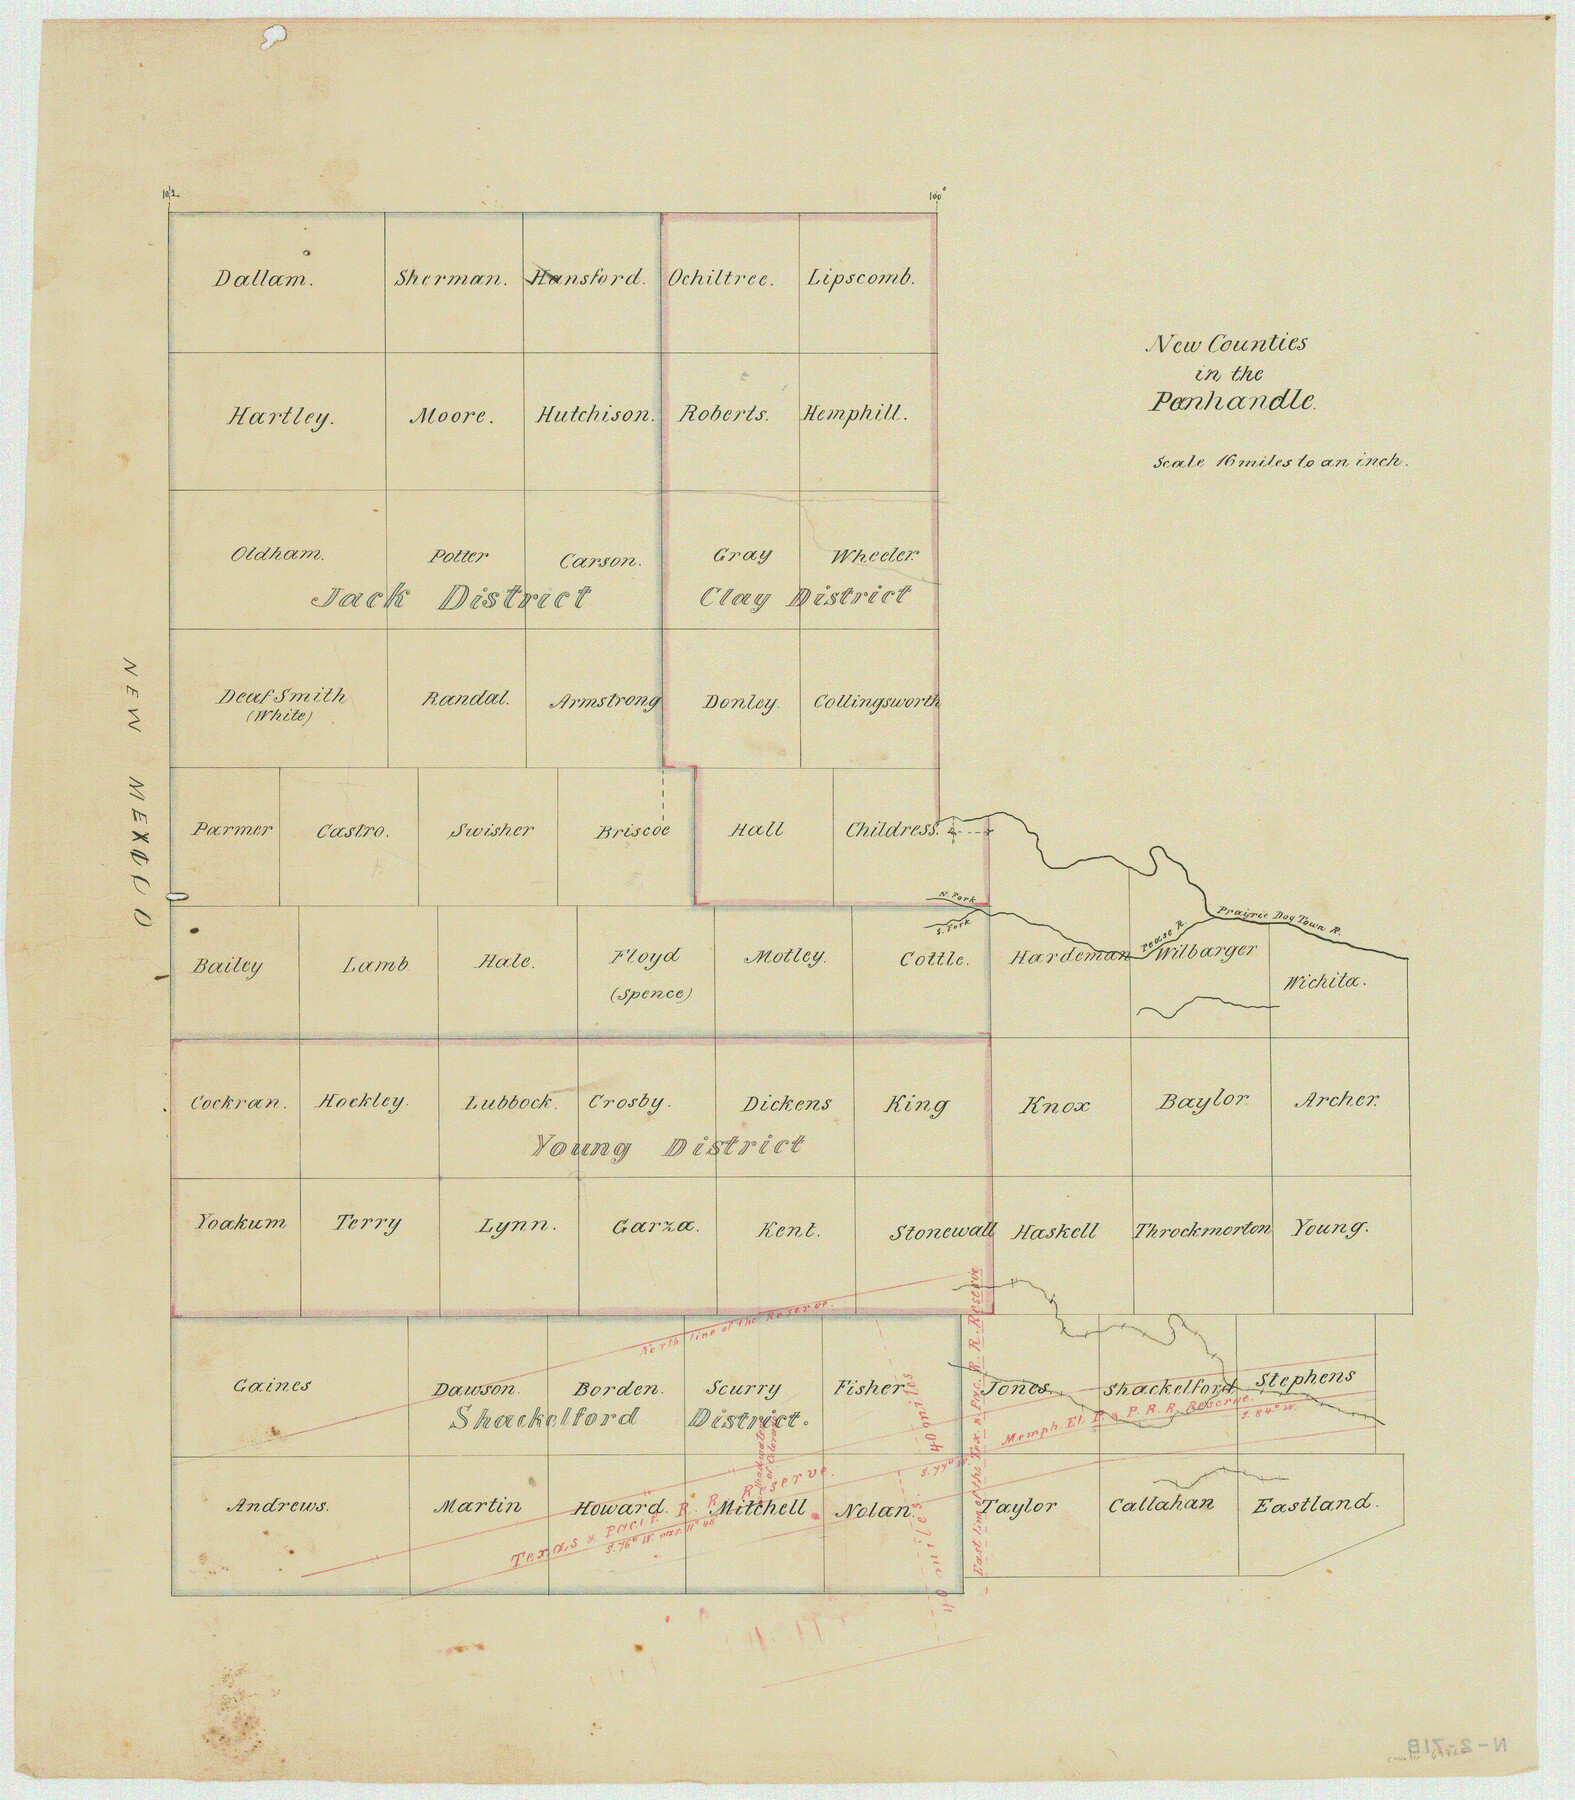 69765, New Counties in the Panhandle, General Map Collection